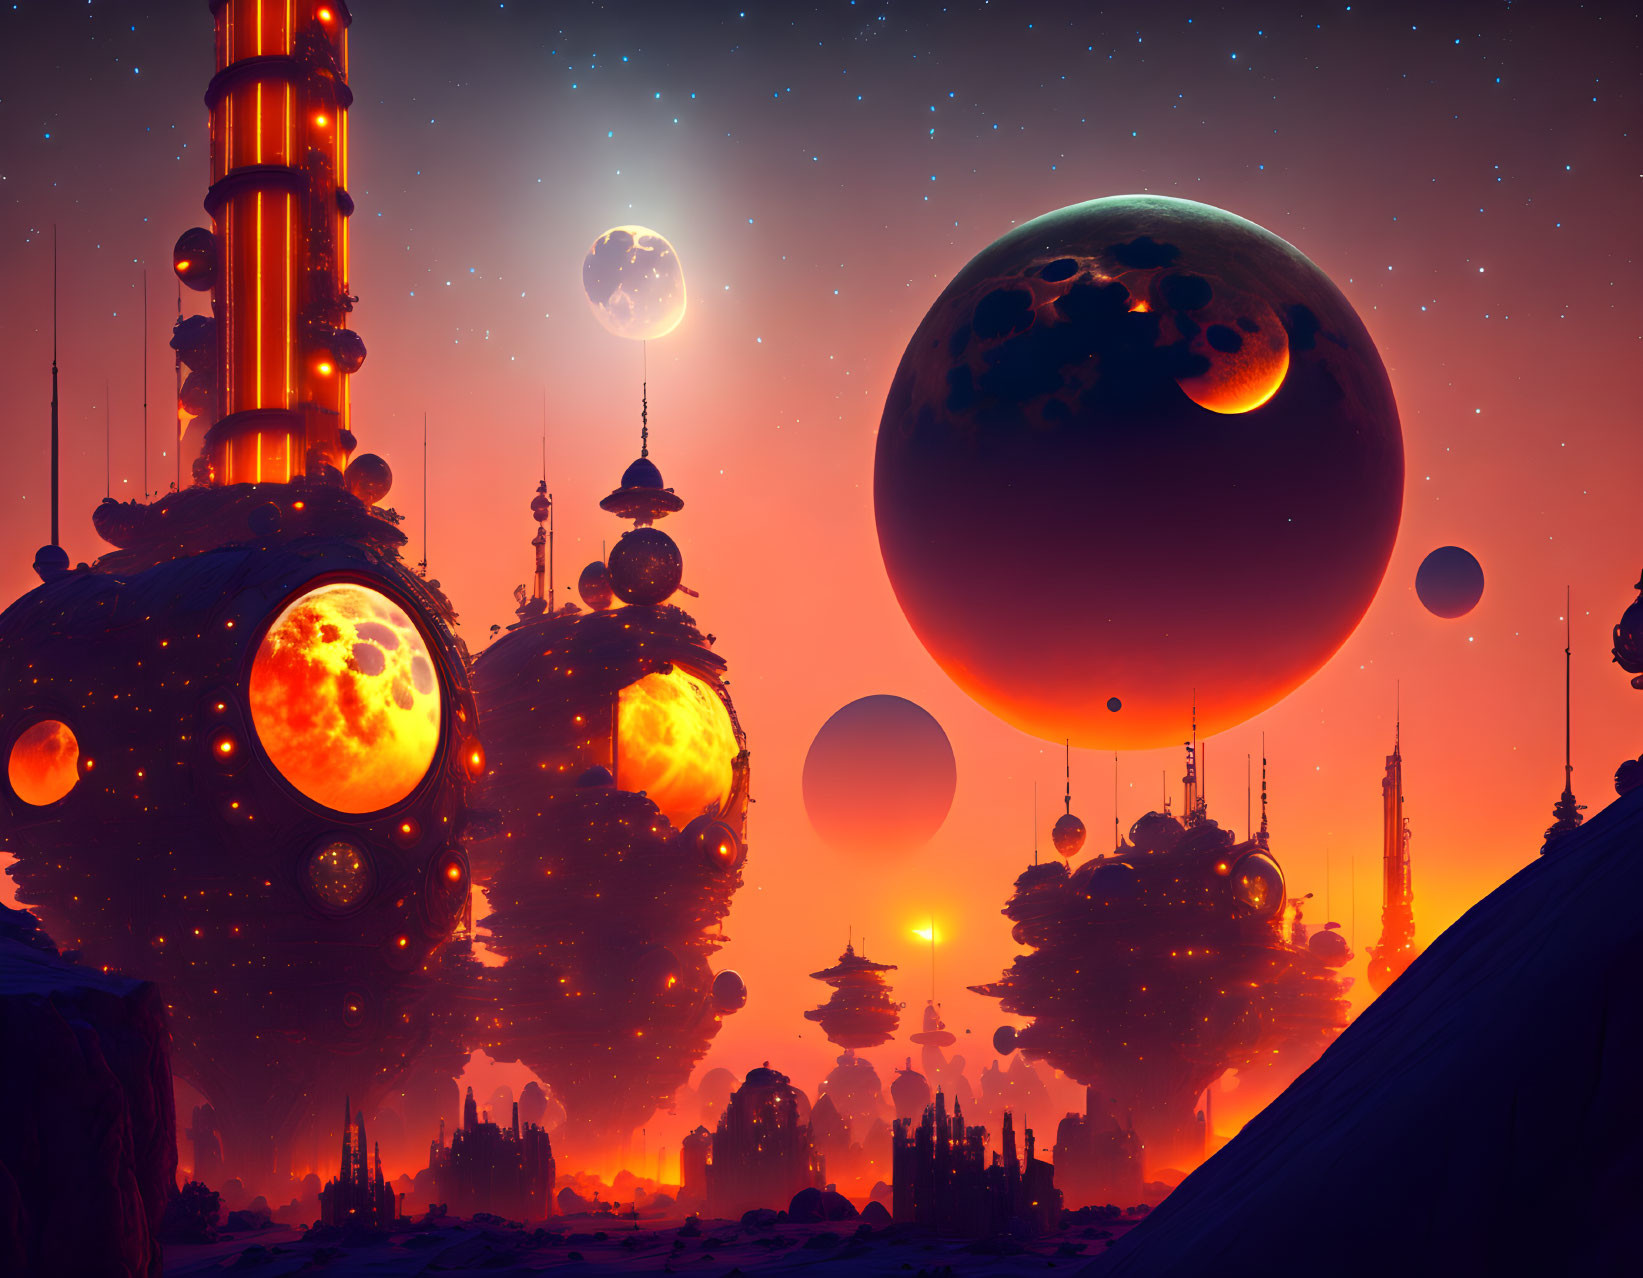 Futuristic sci-fi landscape with floating spheres, towers, moons, and red starry sky